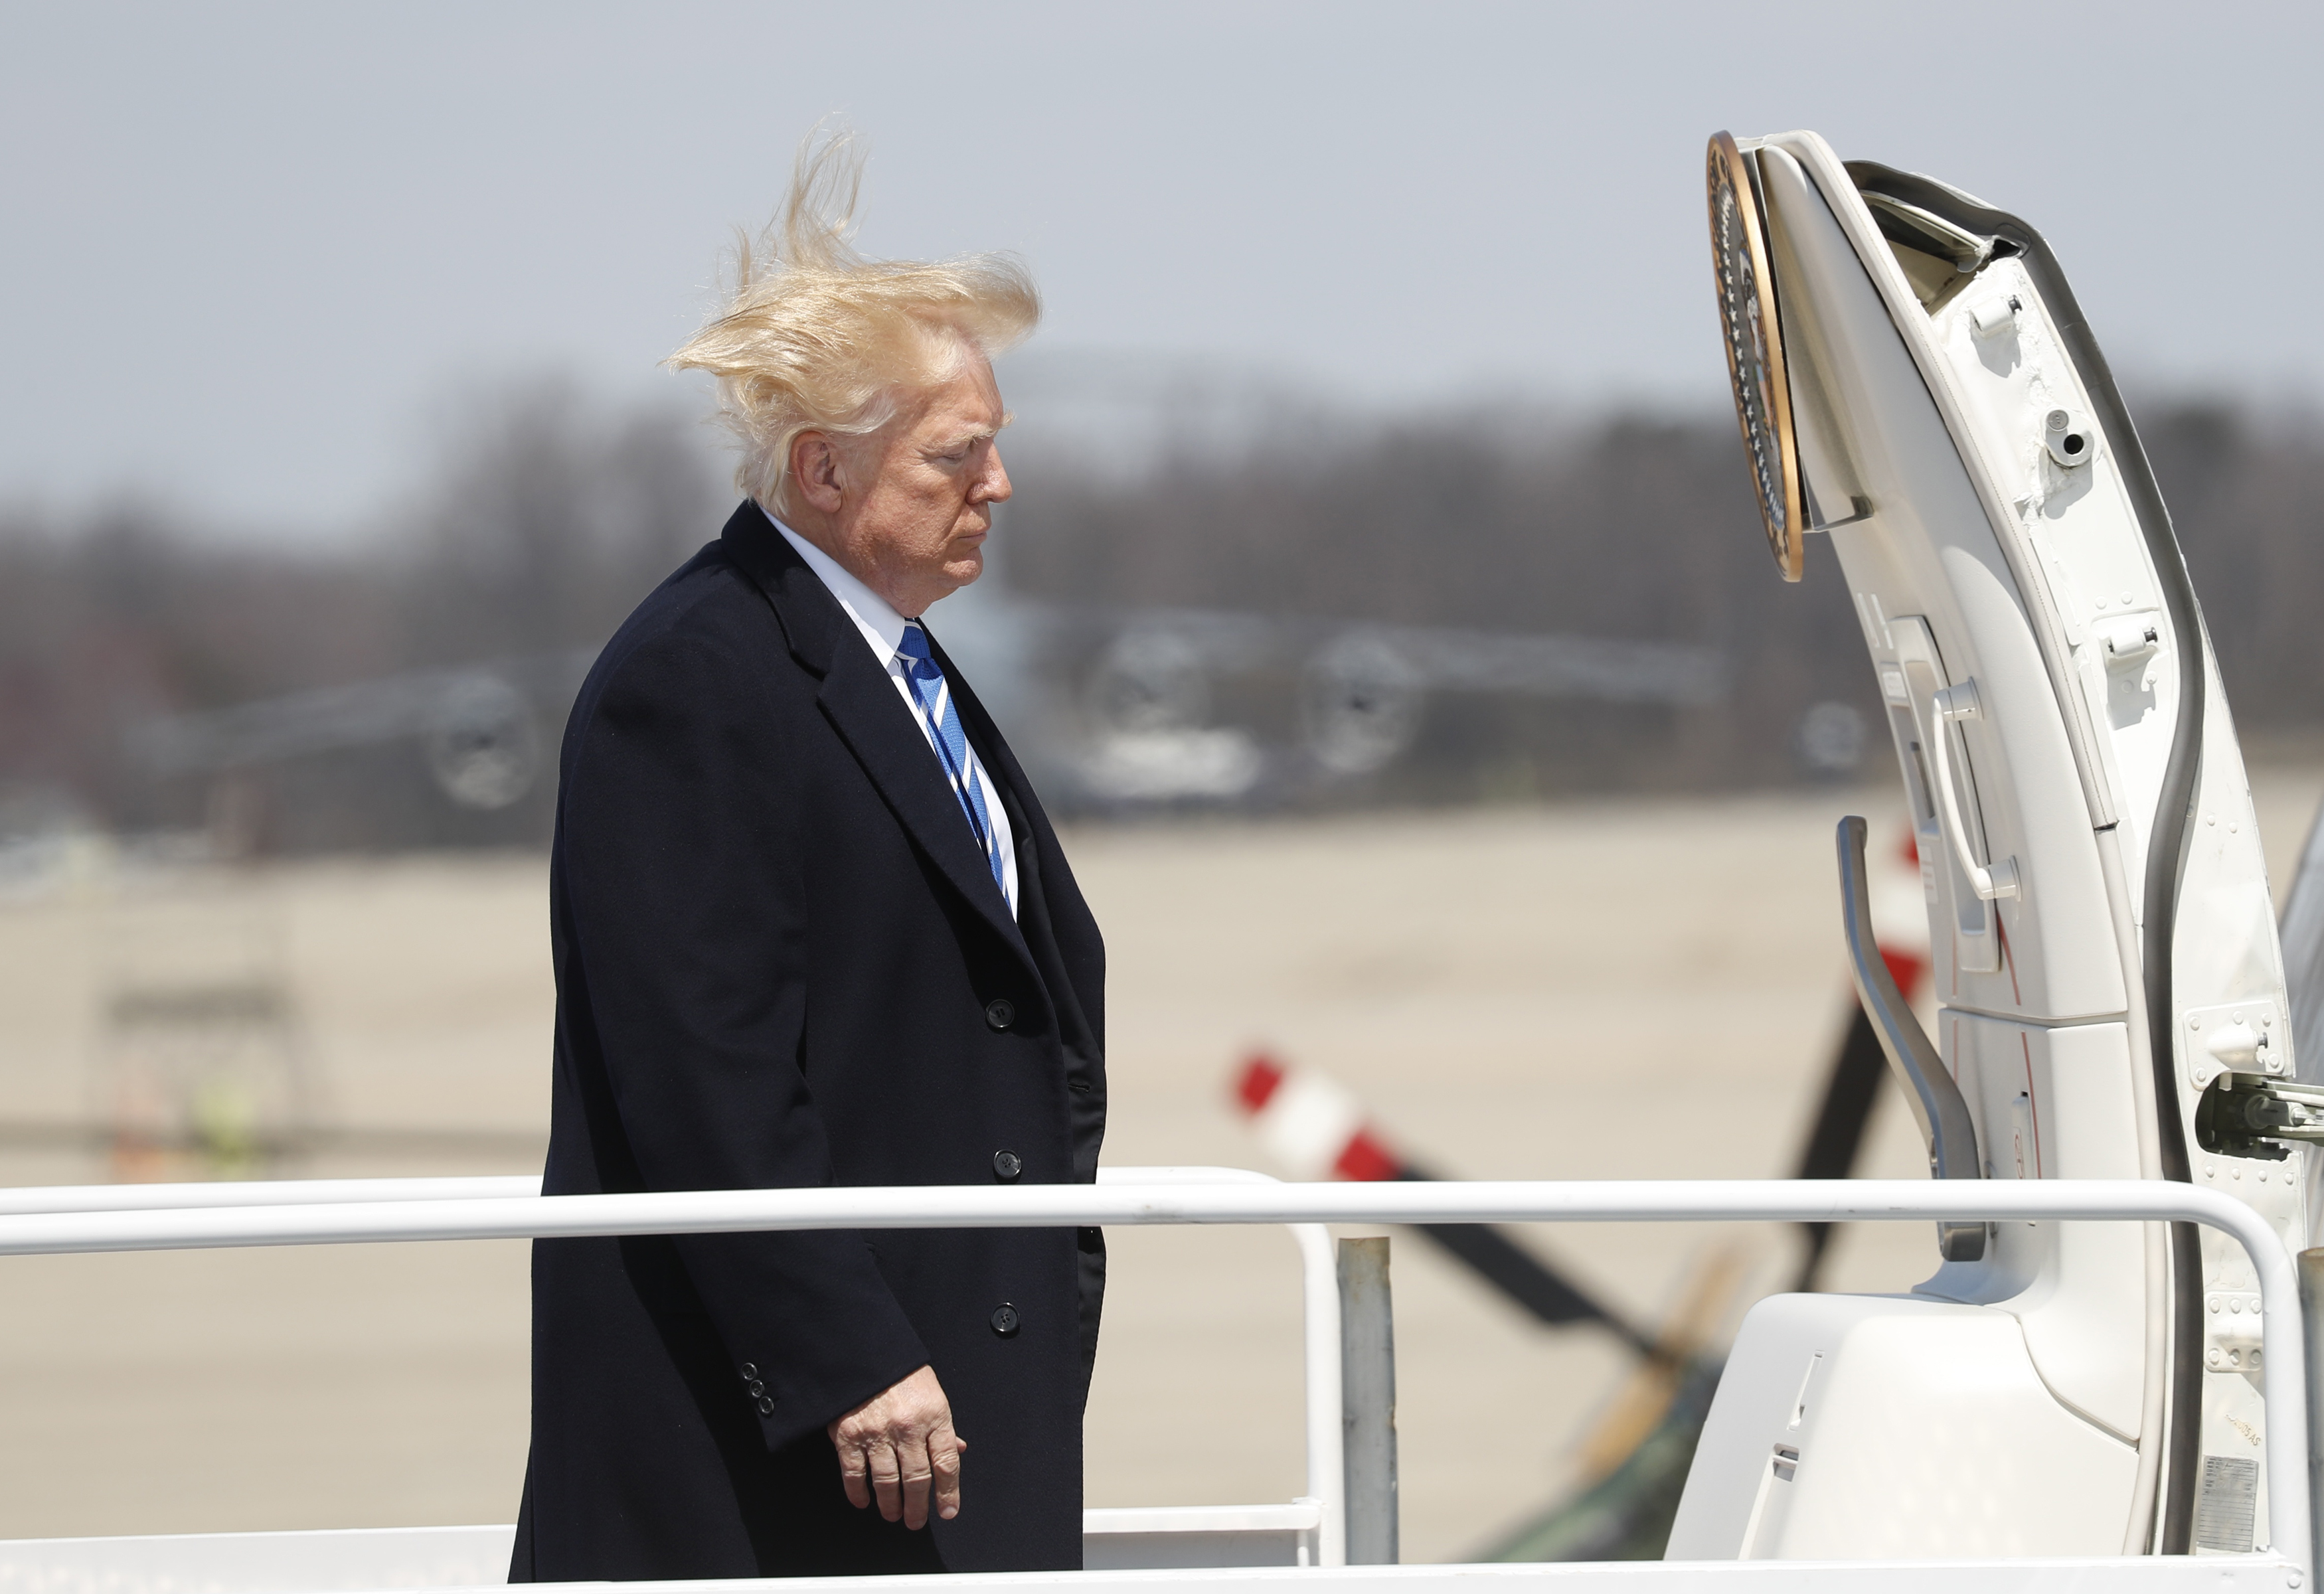 U.S. President Donald Trump boards Air Force One before departing Joint Base Andrews, Maryland en route West Virginia, U.S., April 5, 2018. (REUTERS/Kevin Lamarque)